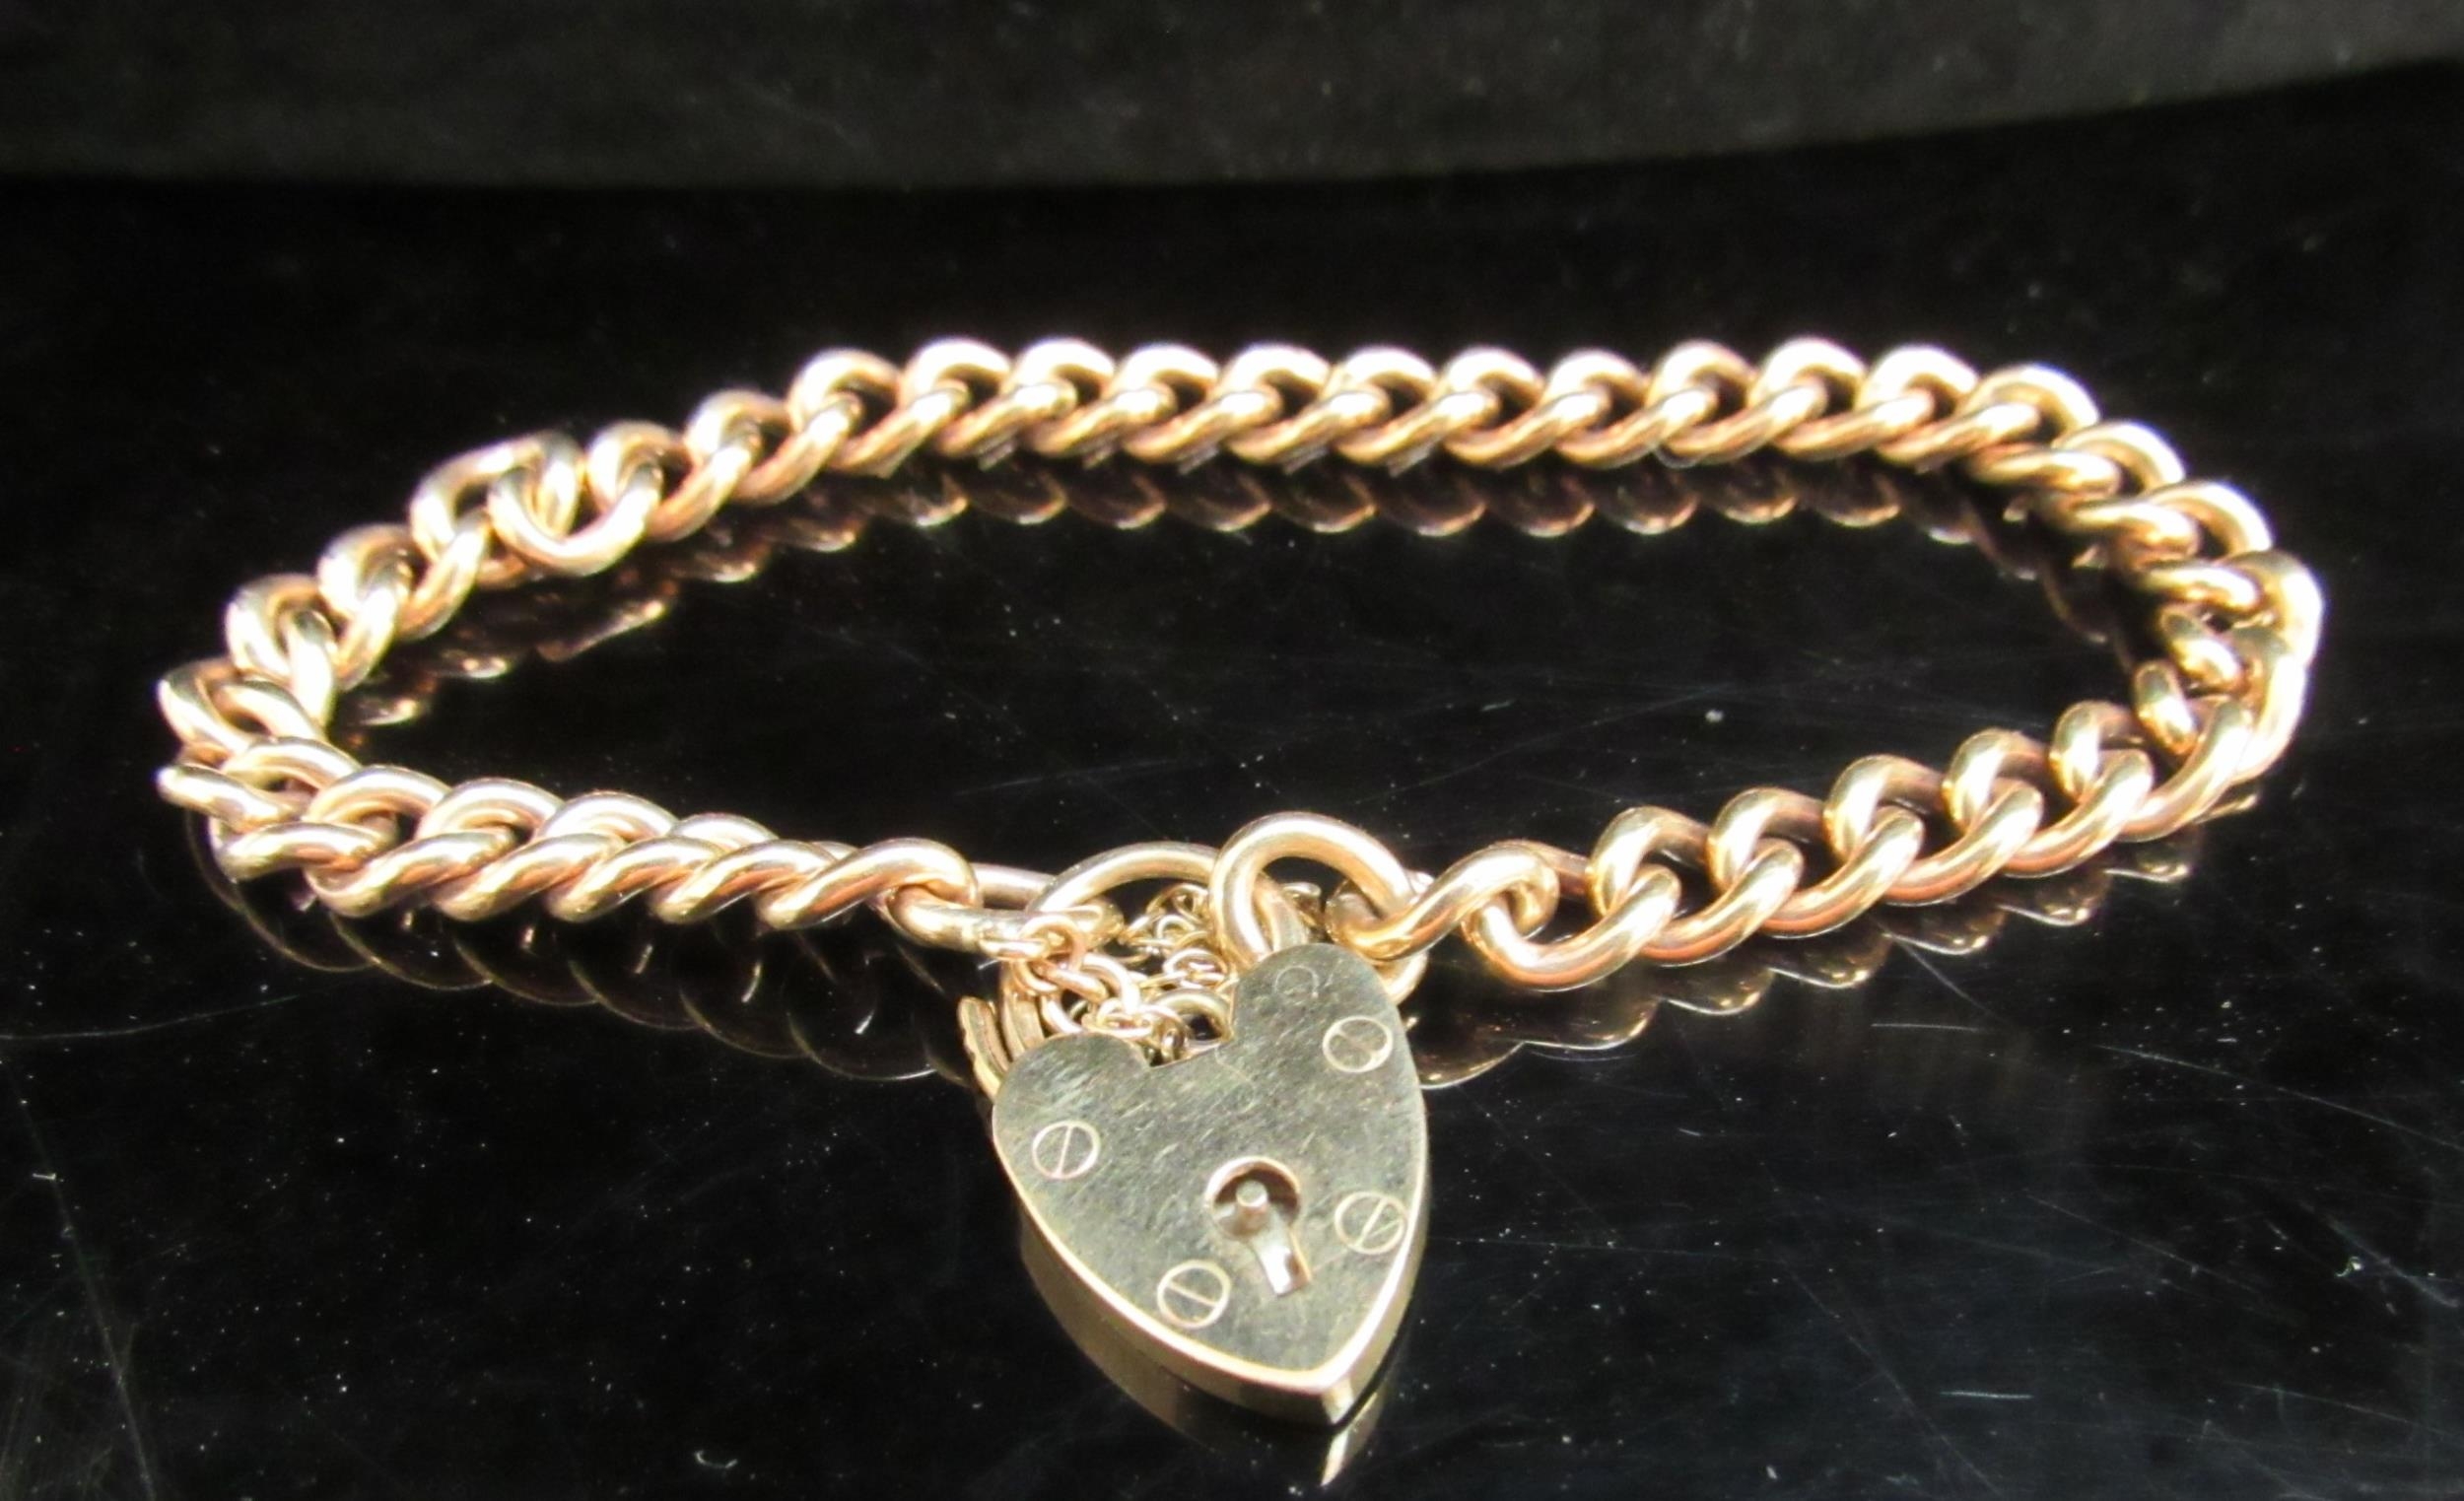 A 9ct gold bracelet with padlock clasp, 19.8g